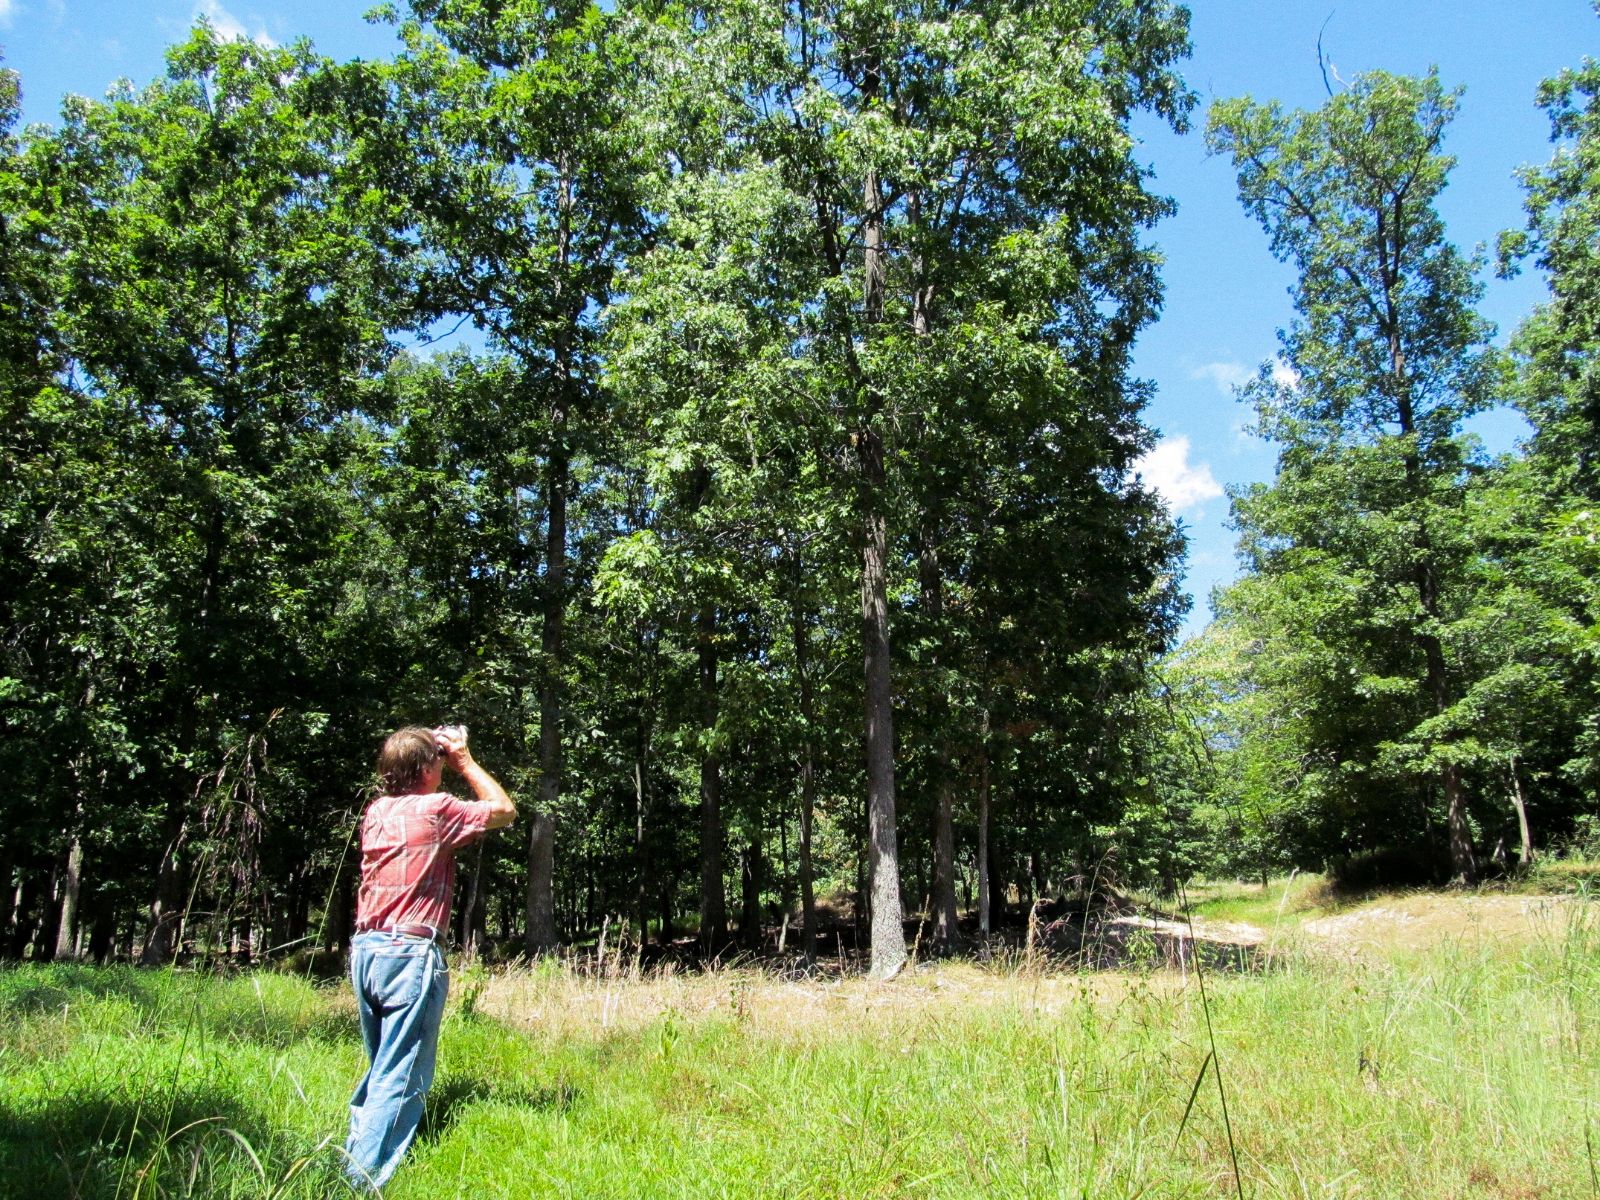 A photo of a man standing at the edge of some woods, looking through binoculars.